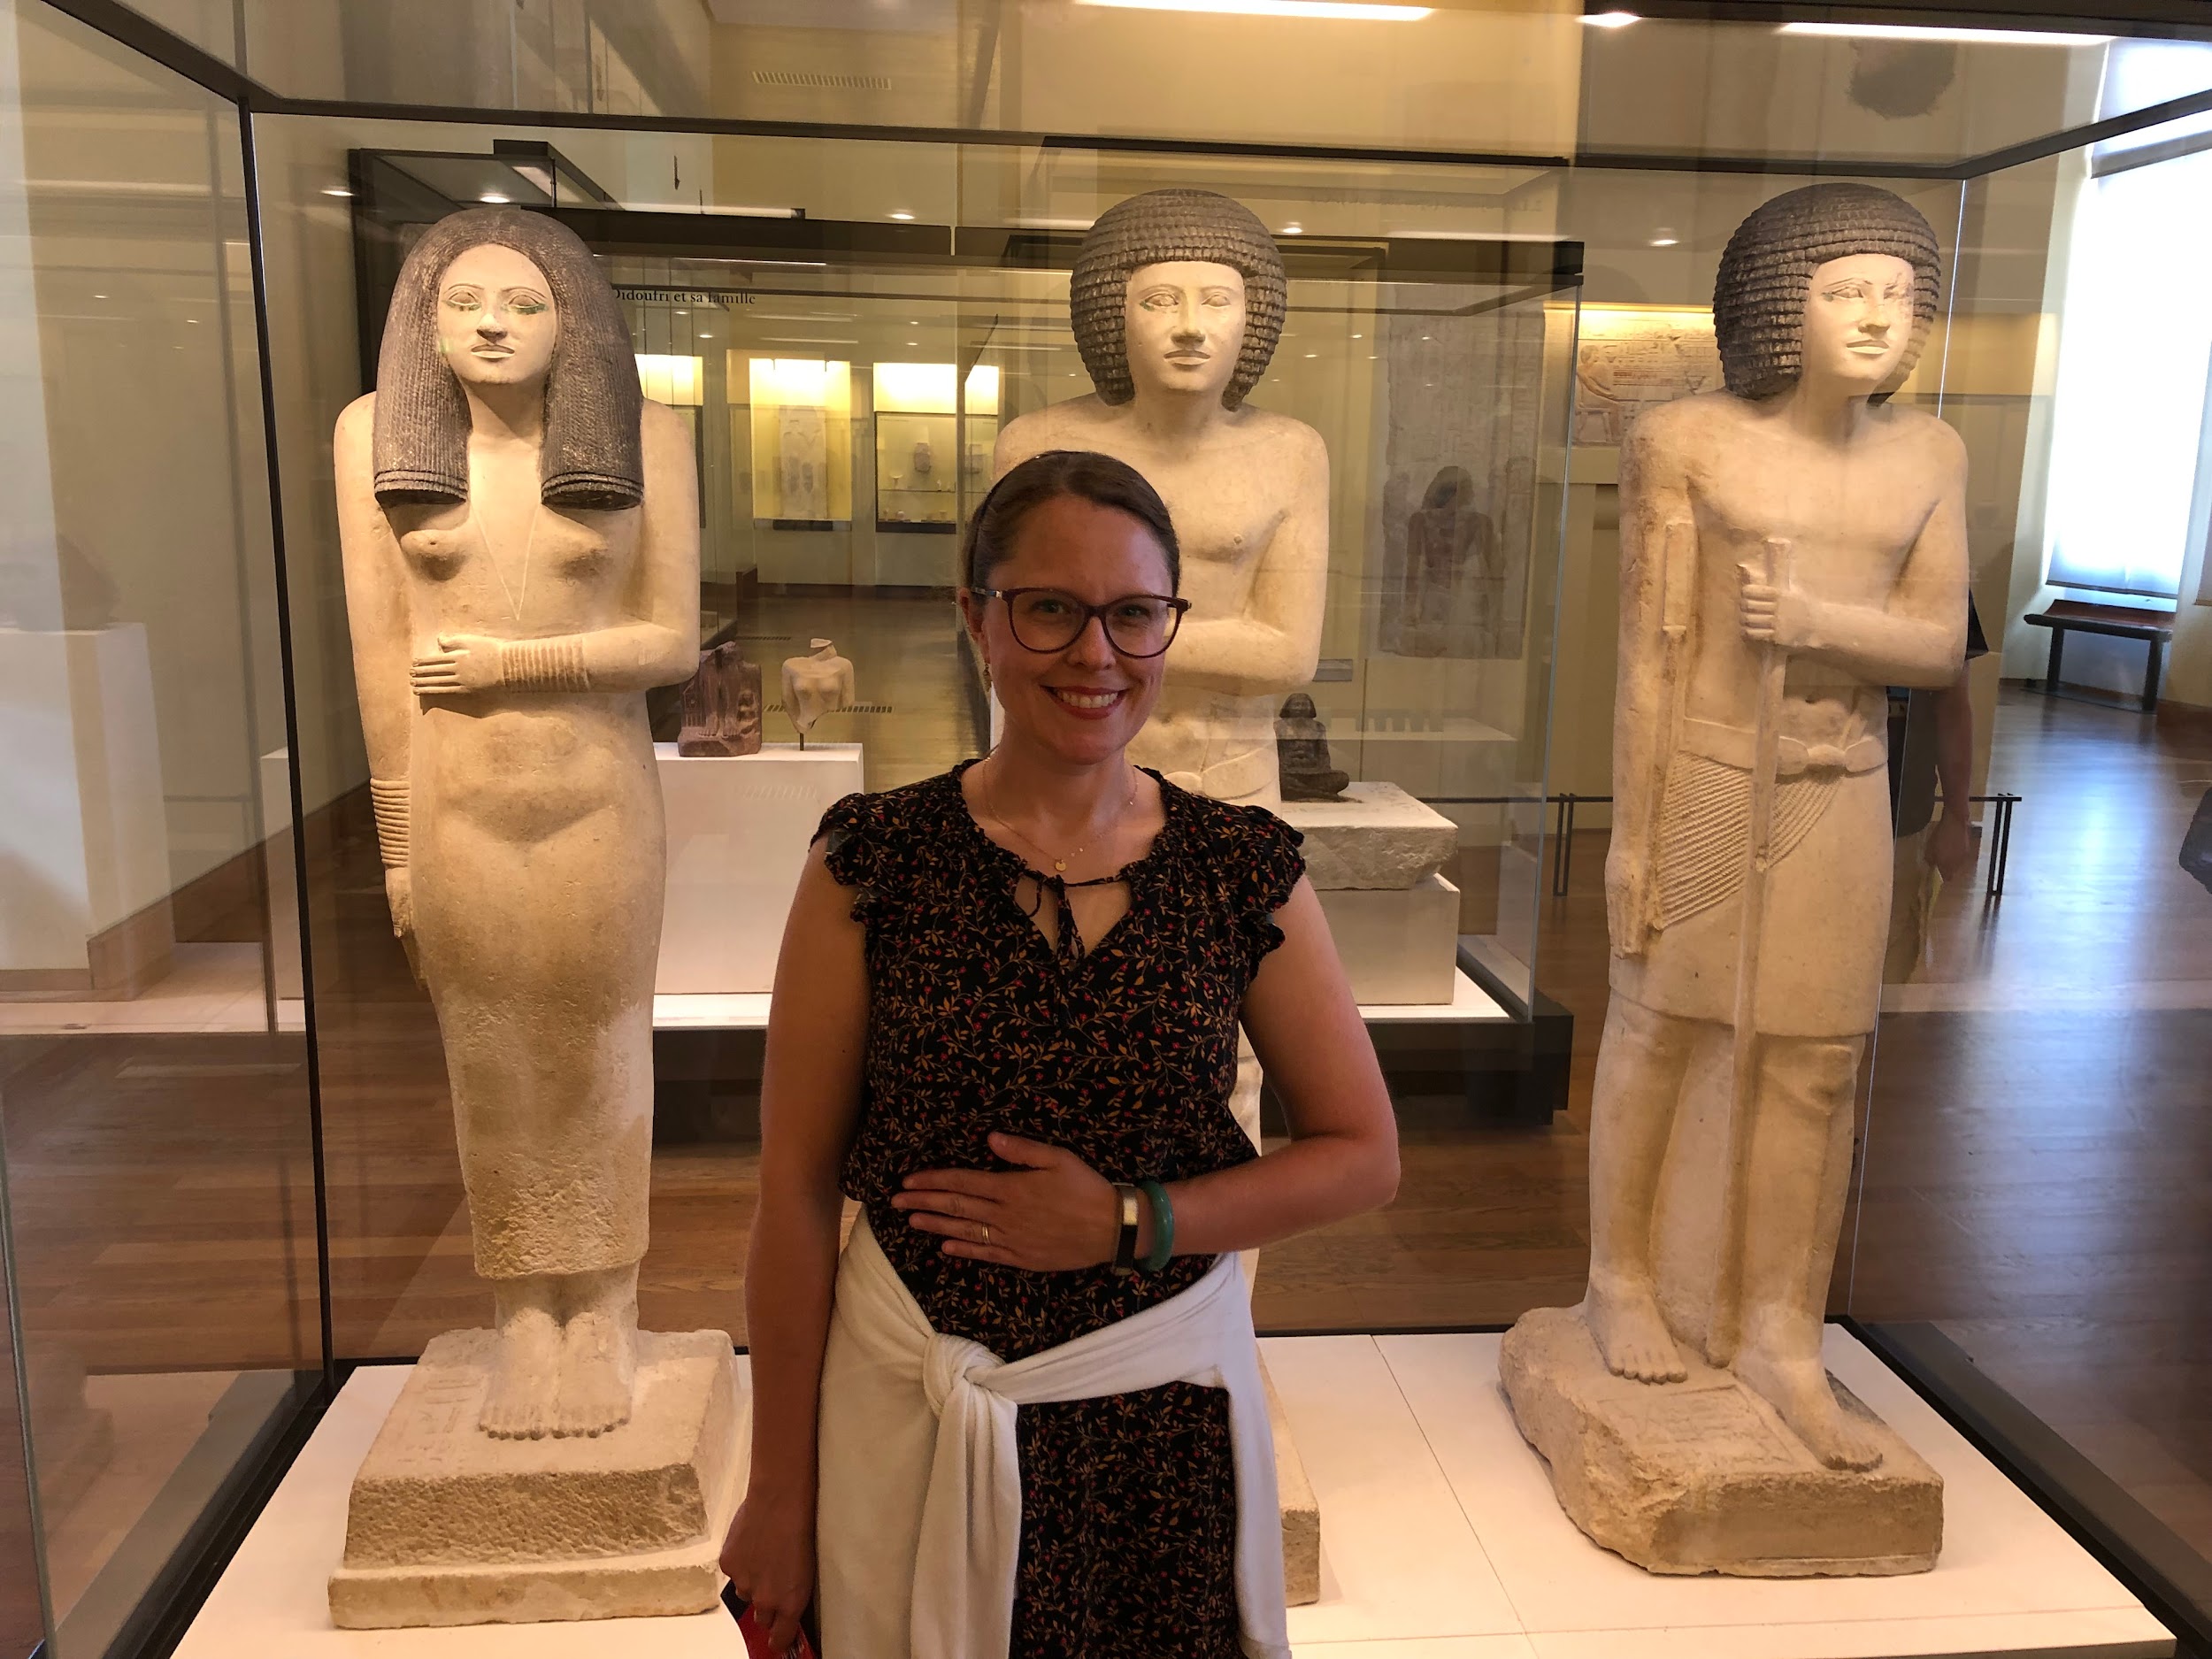 A woman stands in front of museum statues imitating the statues' gestures with a hand over the stomach.